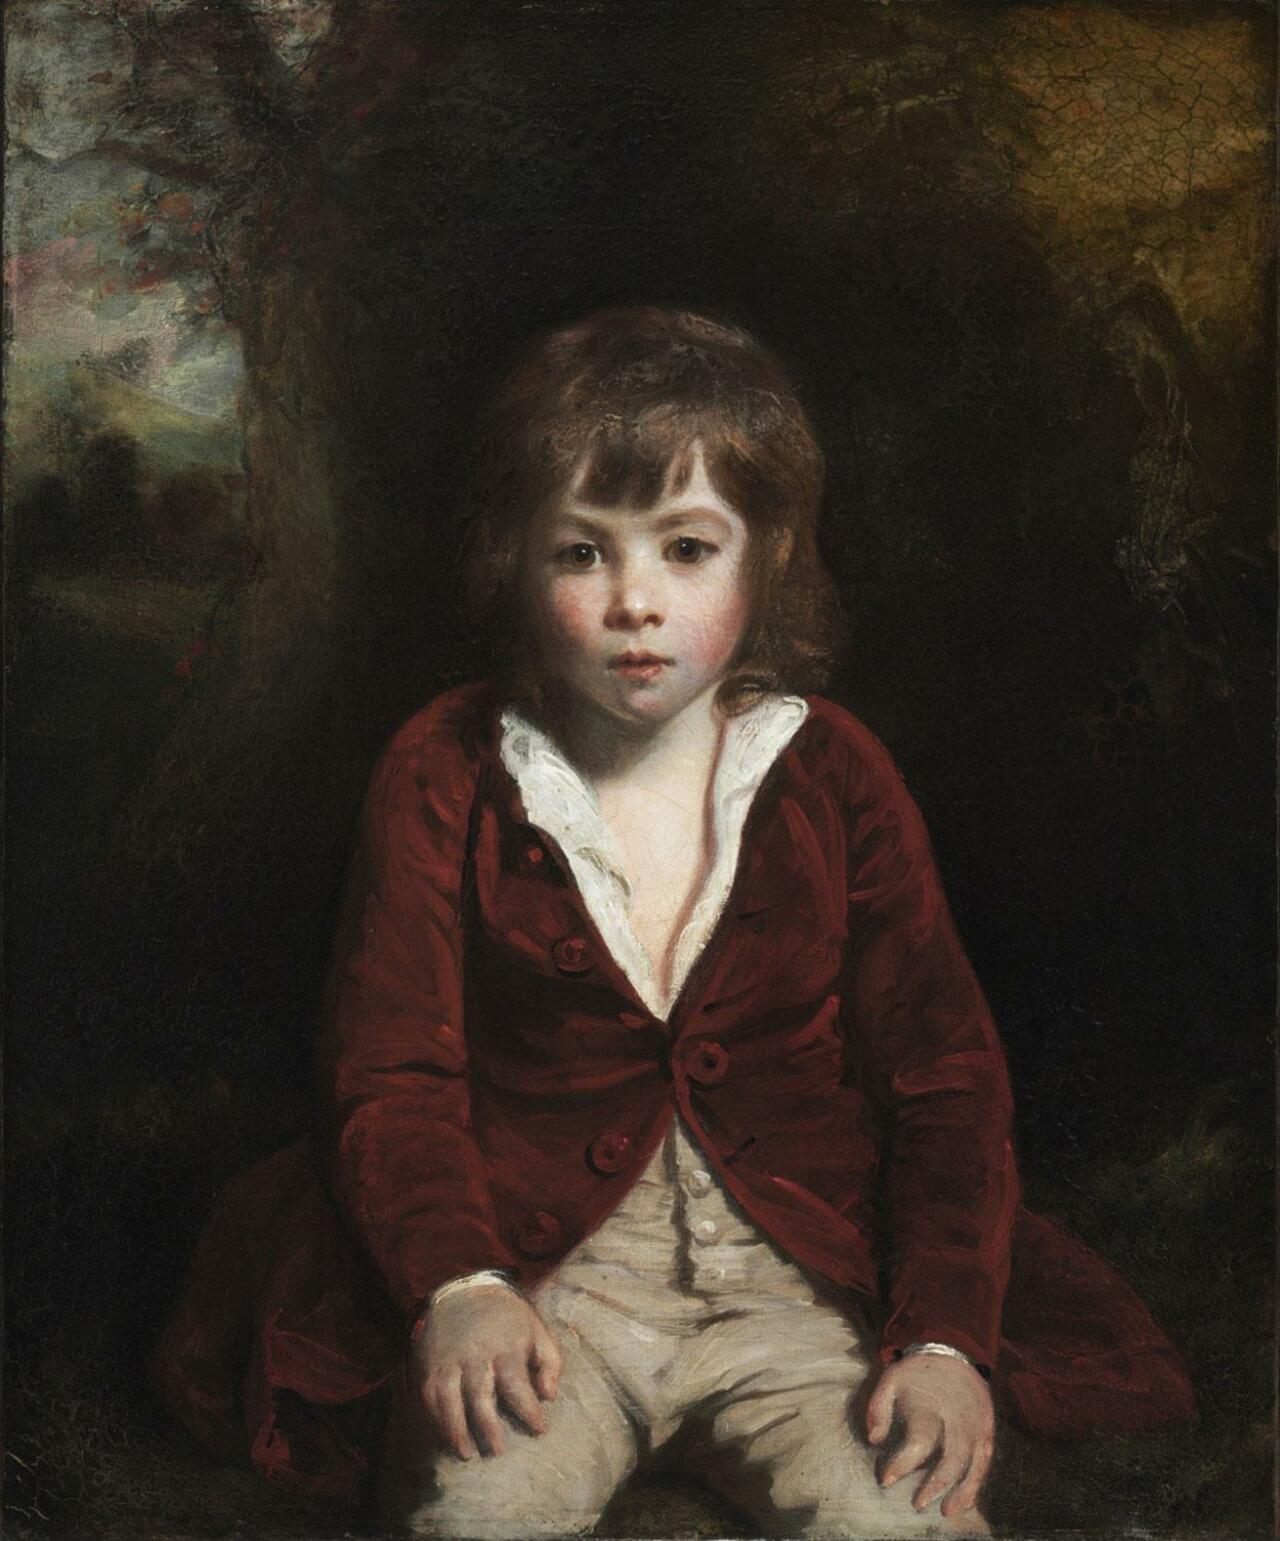 This little boy sat for hours listening to fairytales while his godfather painted his portrait http://ow.ly/LySwr http://t.co/xsdGFVTB9V